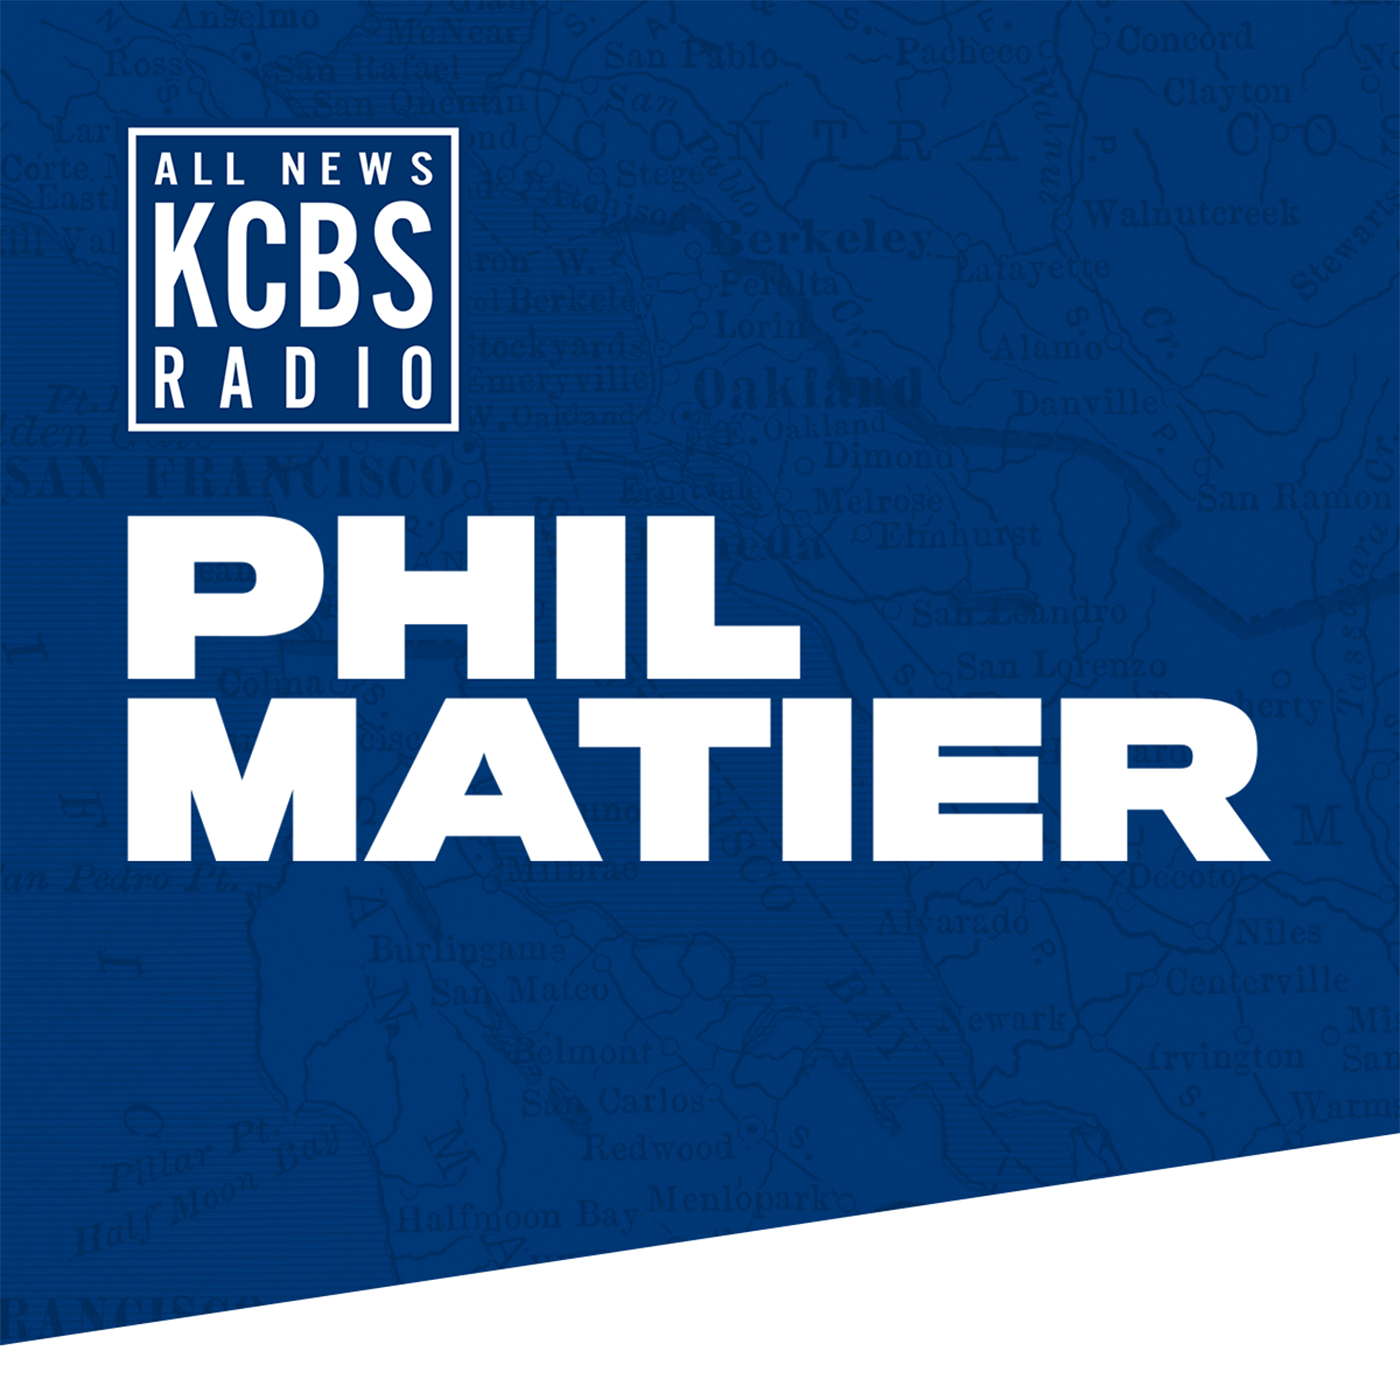 Phil Matier: Is San Francisco Ready For the Next Big Earthquake?